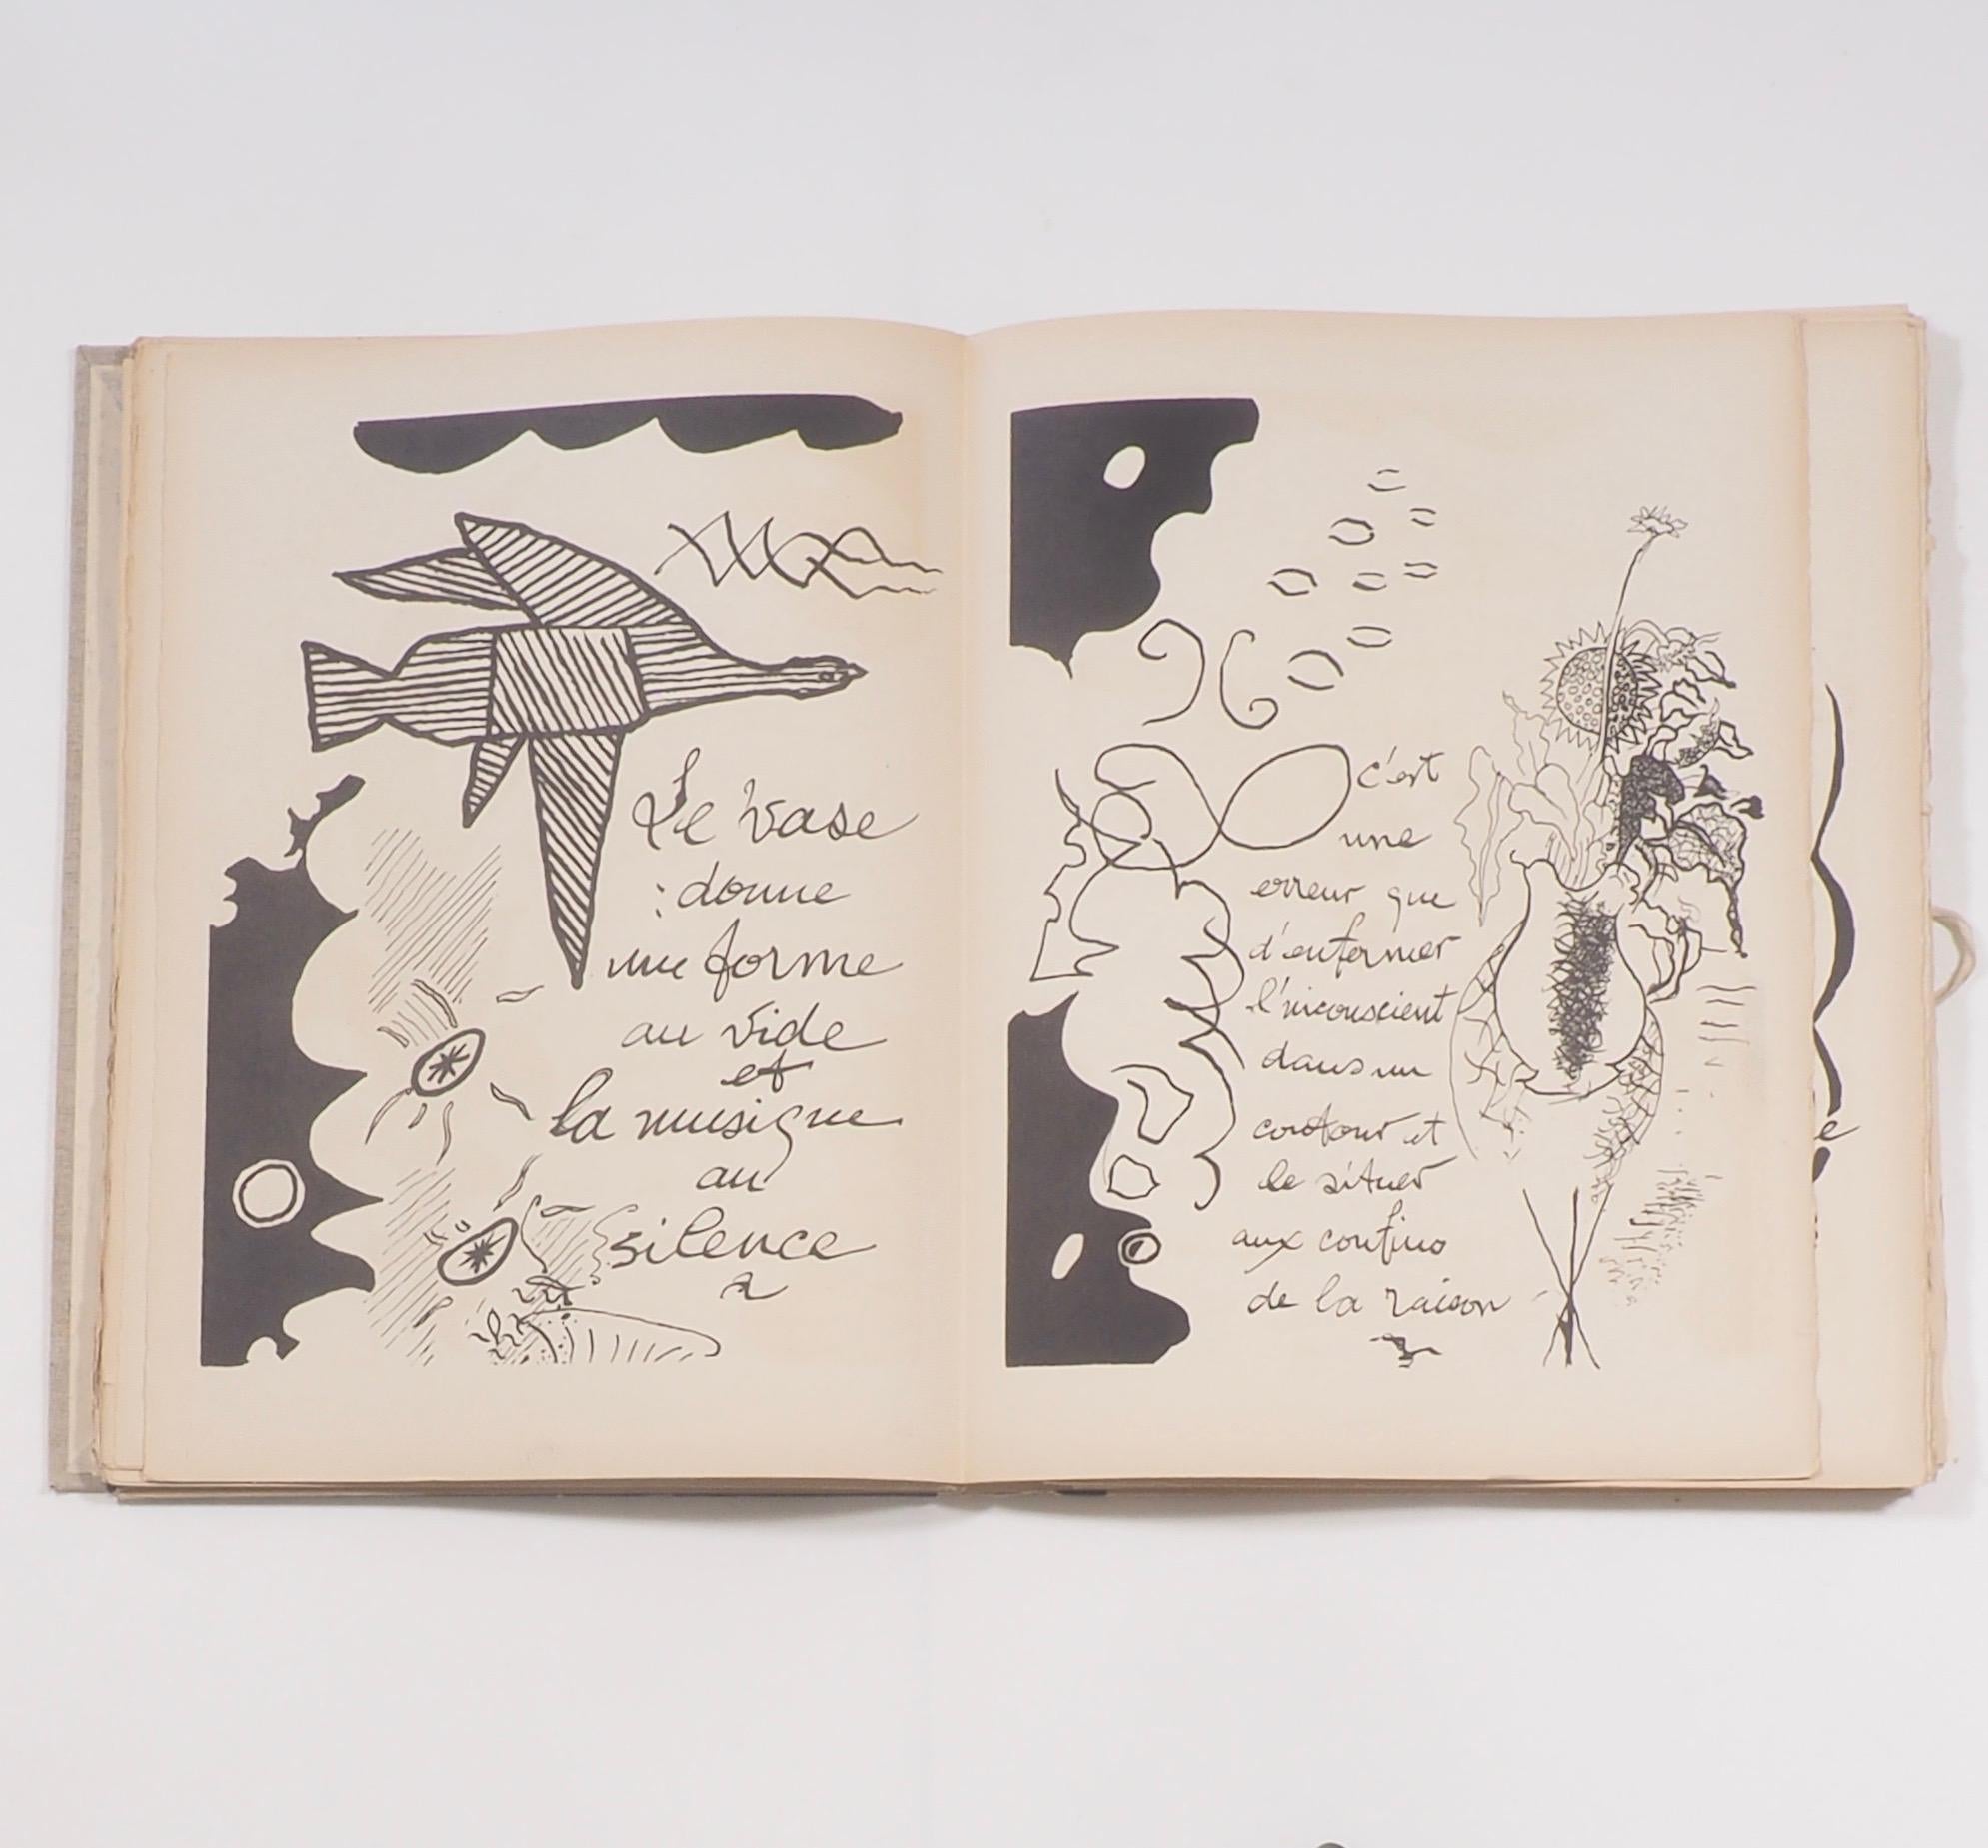 Cahier de Georges Braque 1917-1955 First Edition Book 1956 1